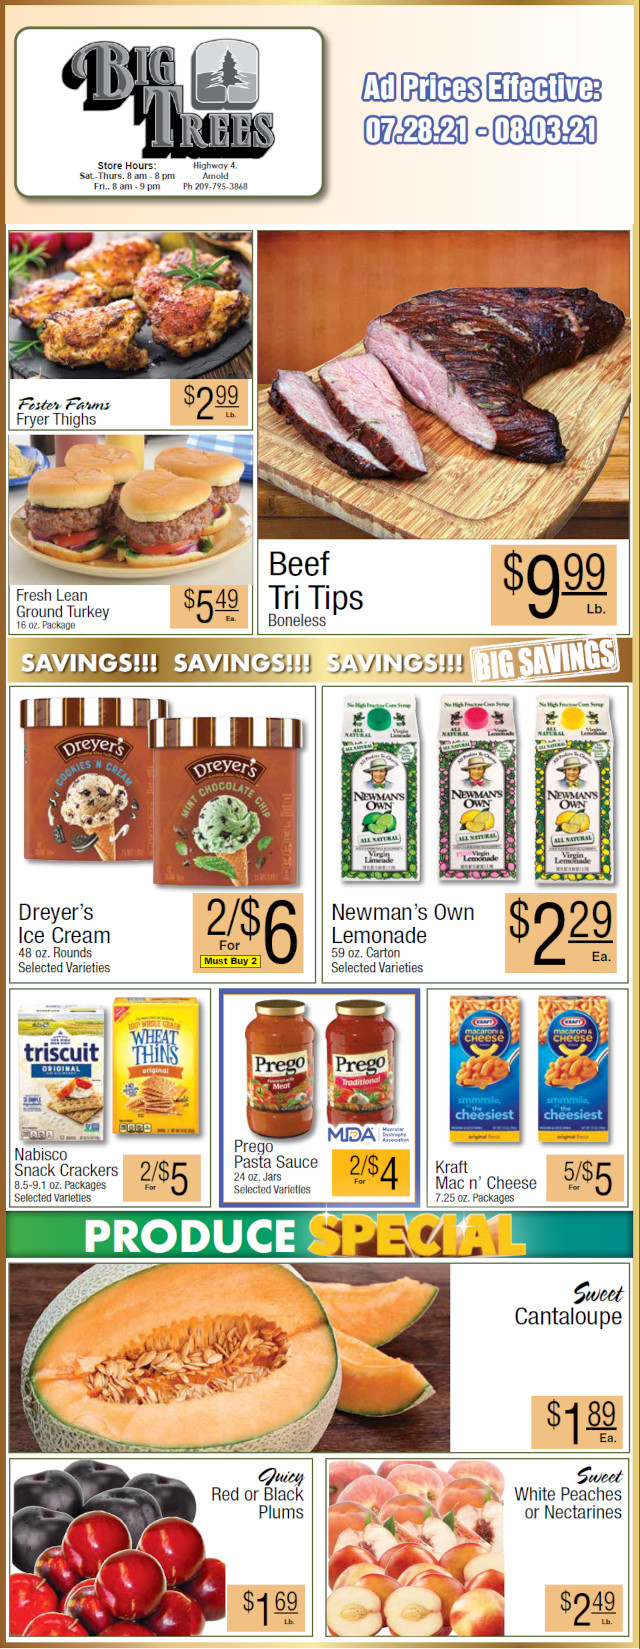 Big Trees Market Weekly Ad & Grocery Specials Through August 3rd! Shop Local & Save!!